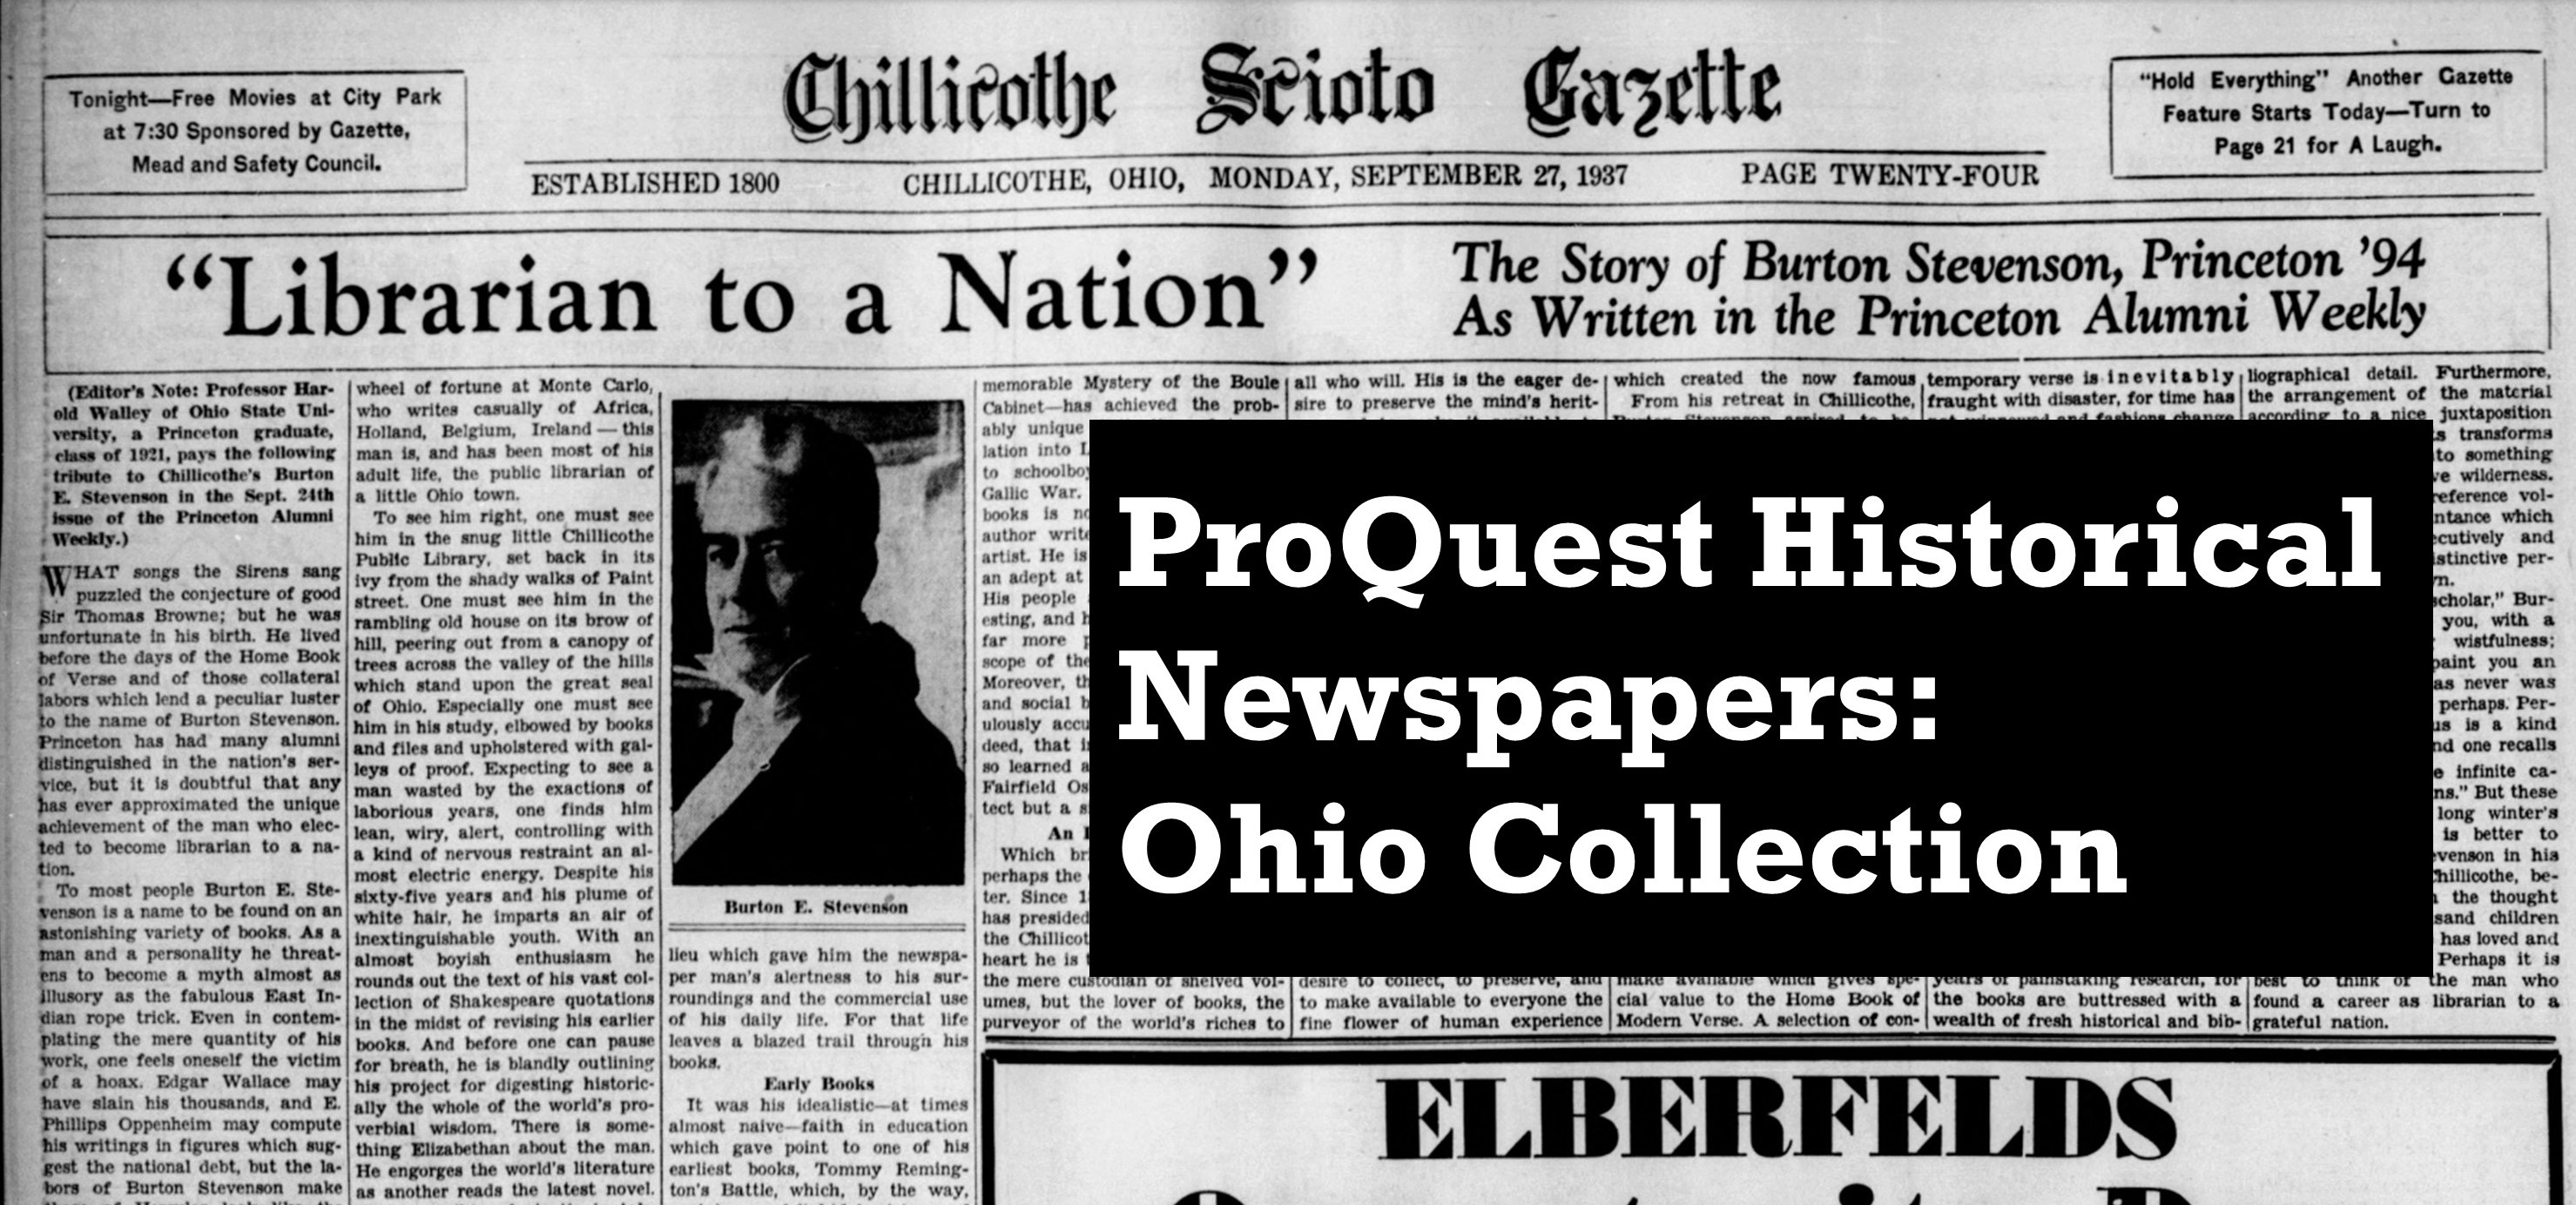 Ohio Historical Newspapers Collection